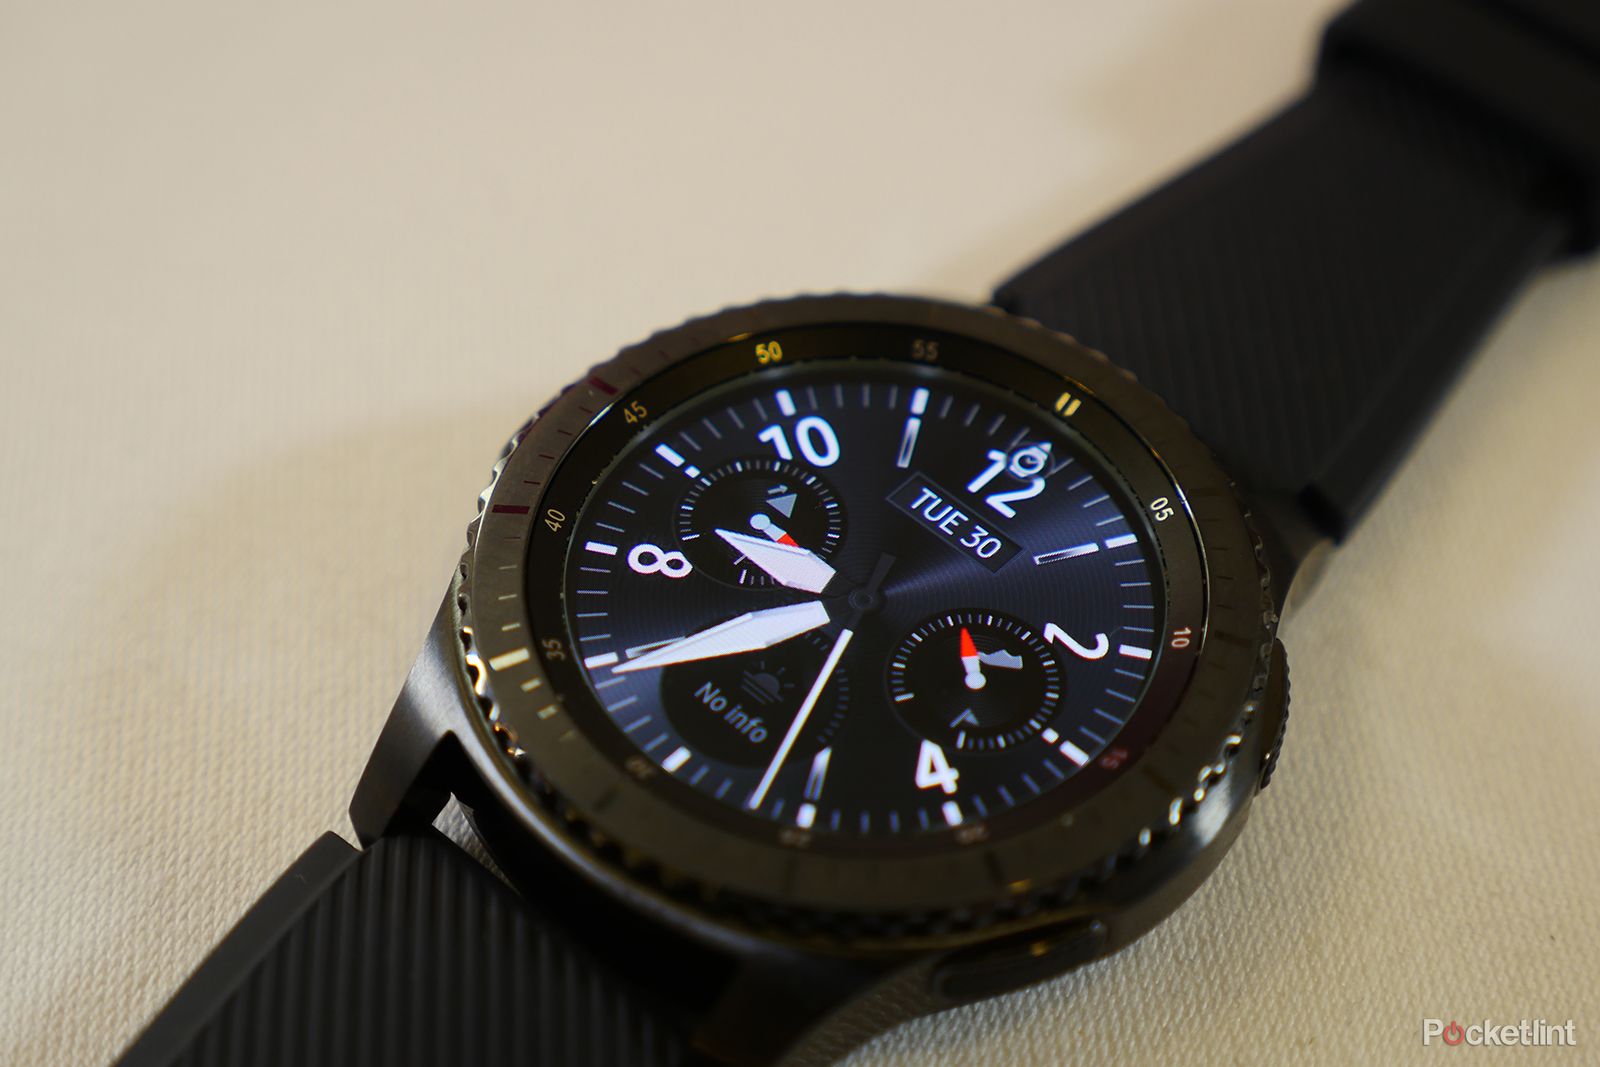 Samsung Gear S4 could be gearing up for launch in Q4 2018 image 1